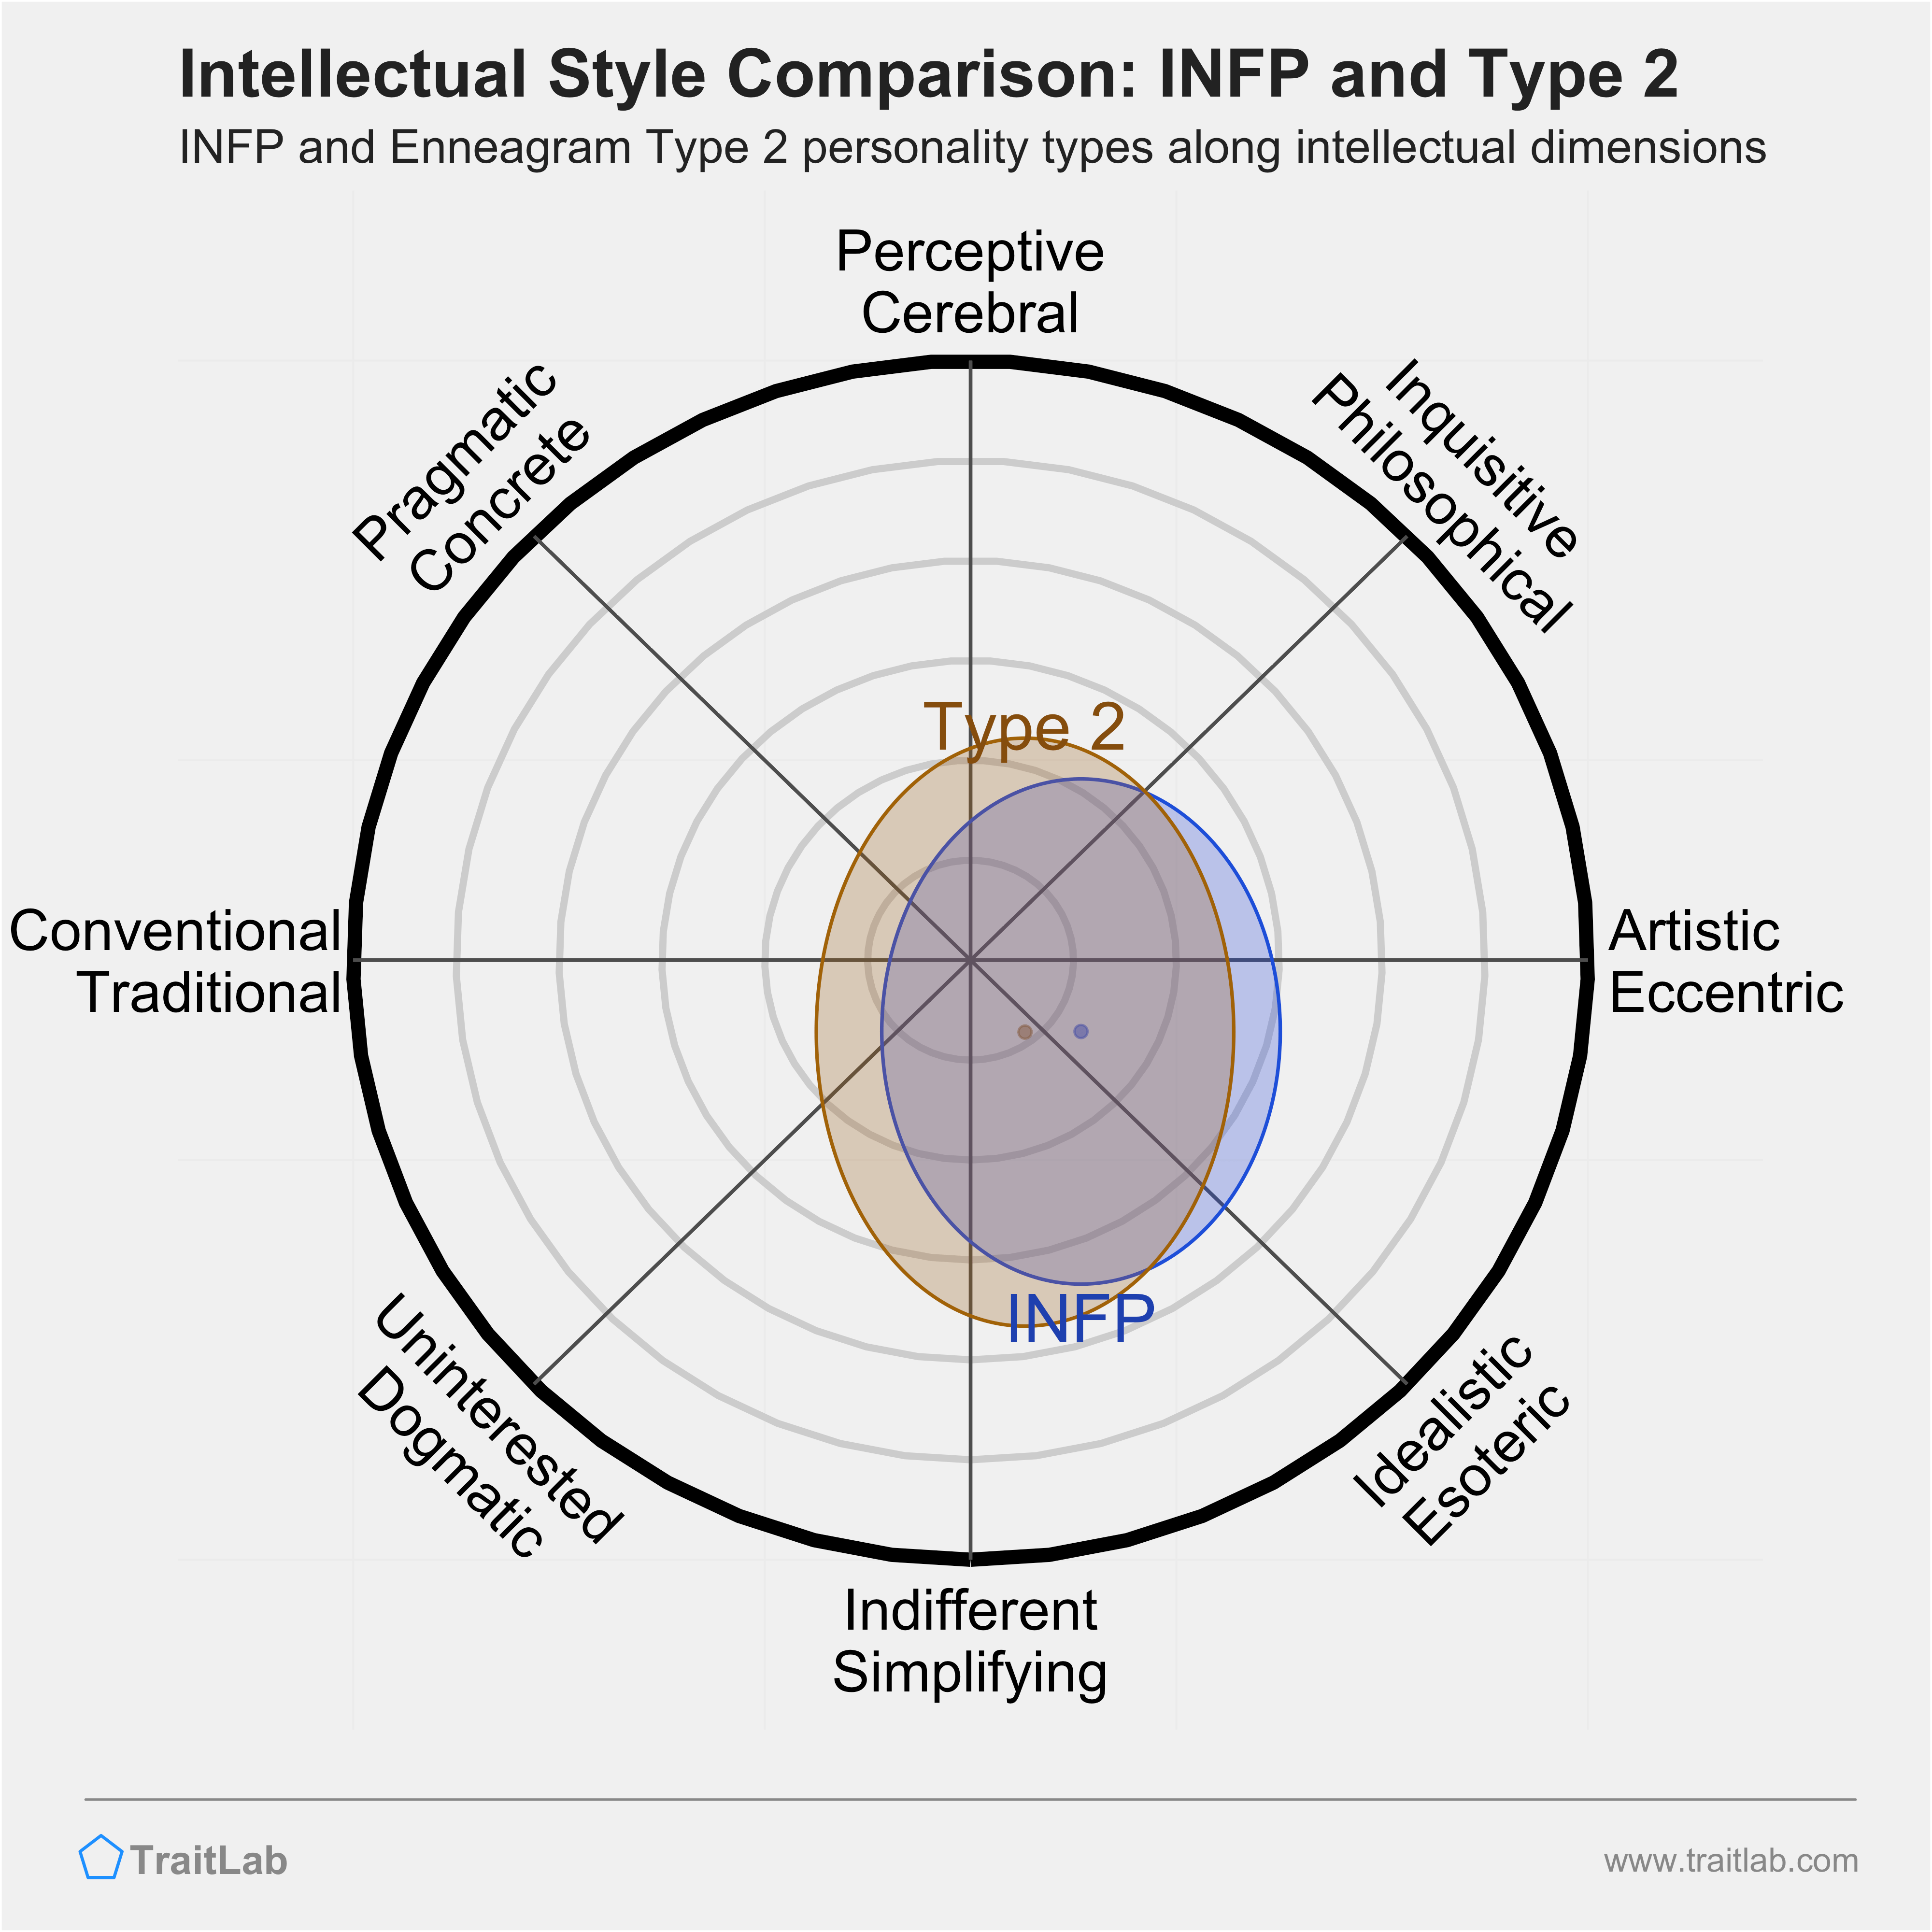 INFP and Type 2 comparison across intellectual dimensions